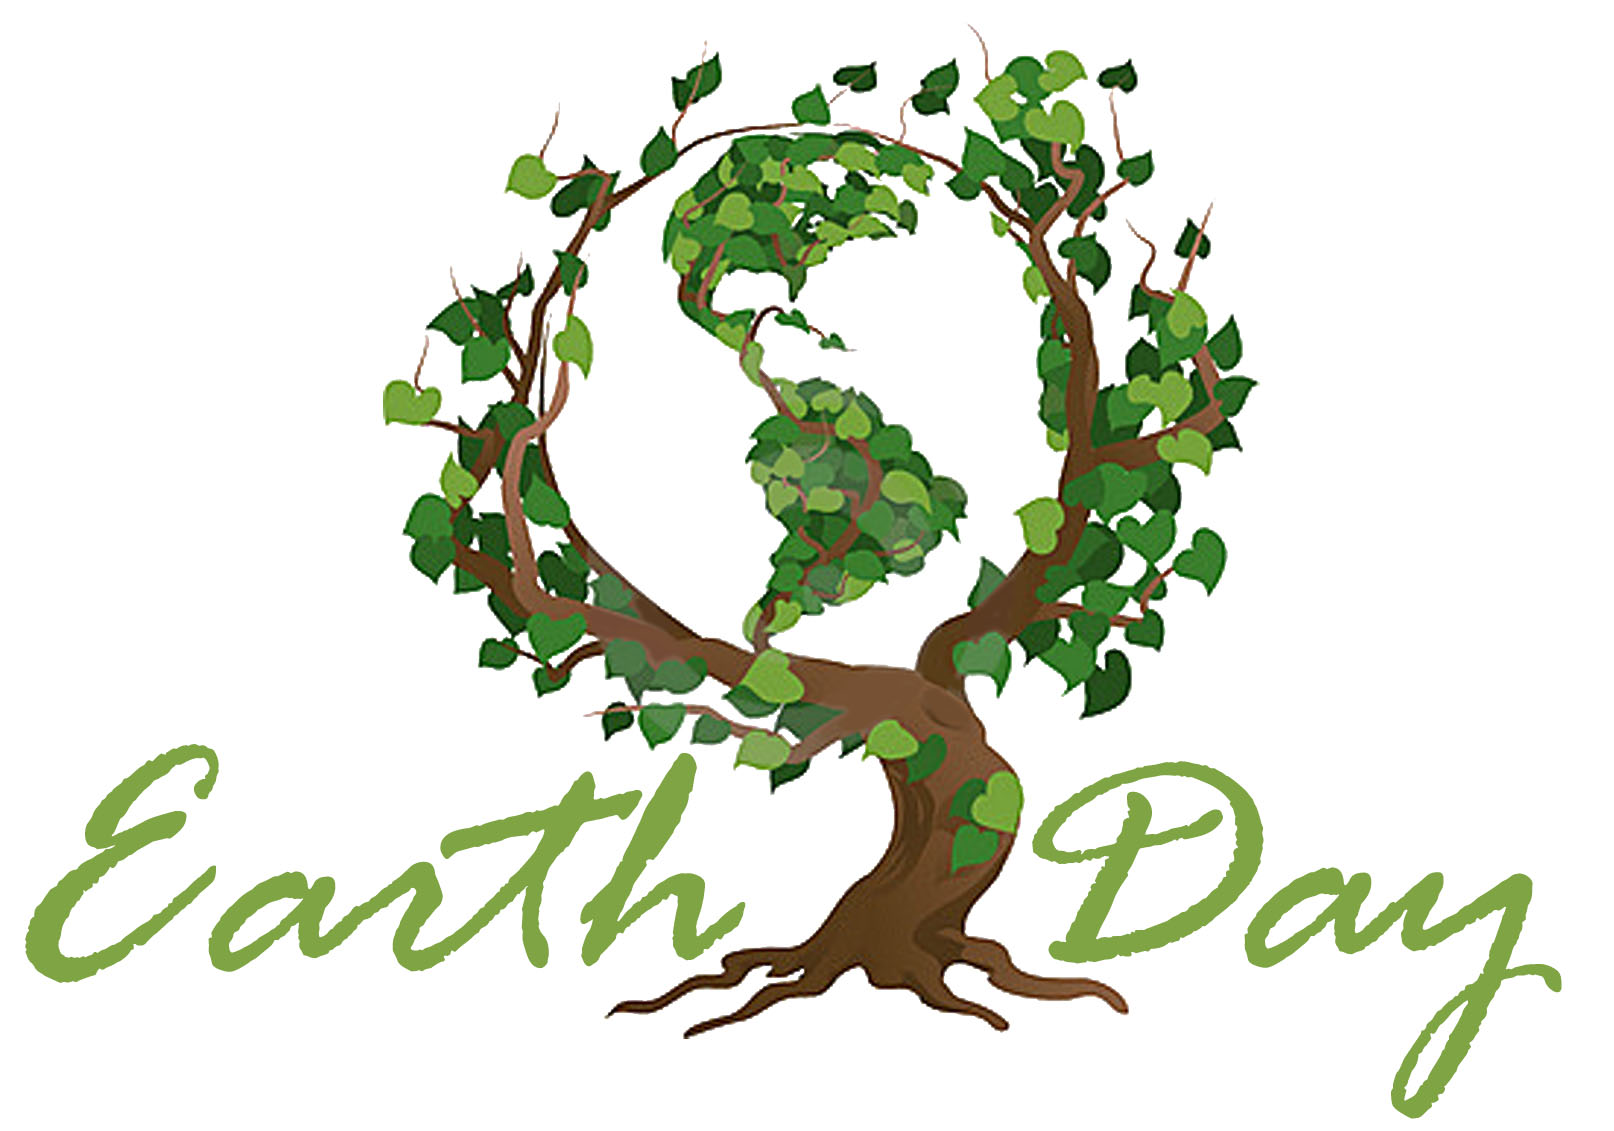 Earth Day Images